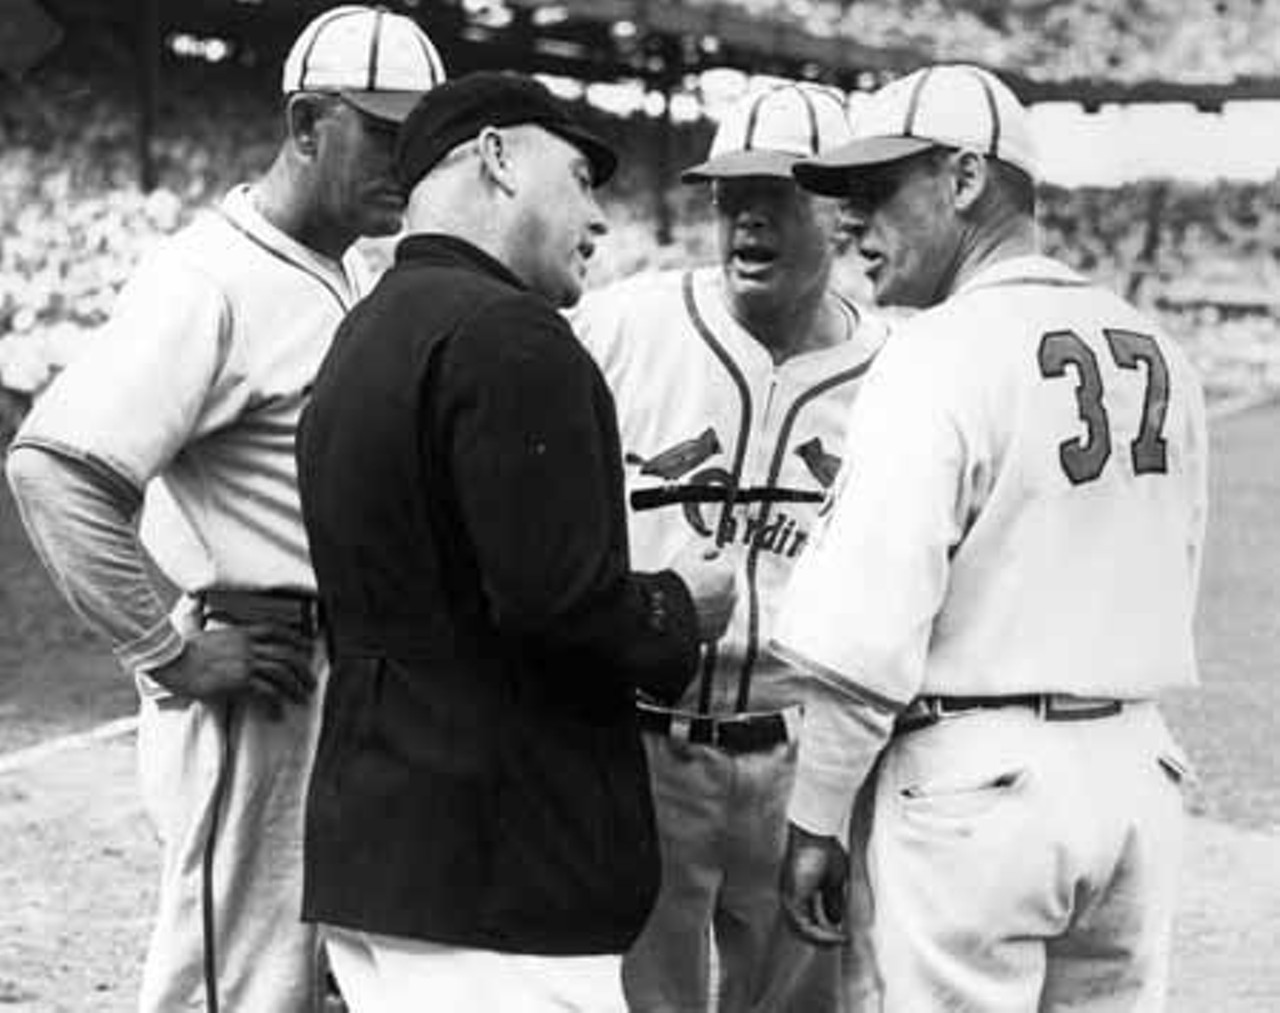 Cardinals players argue with the umpire.